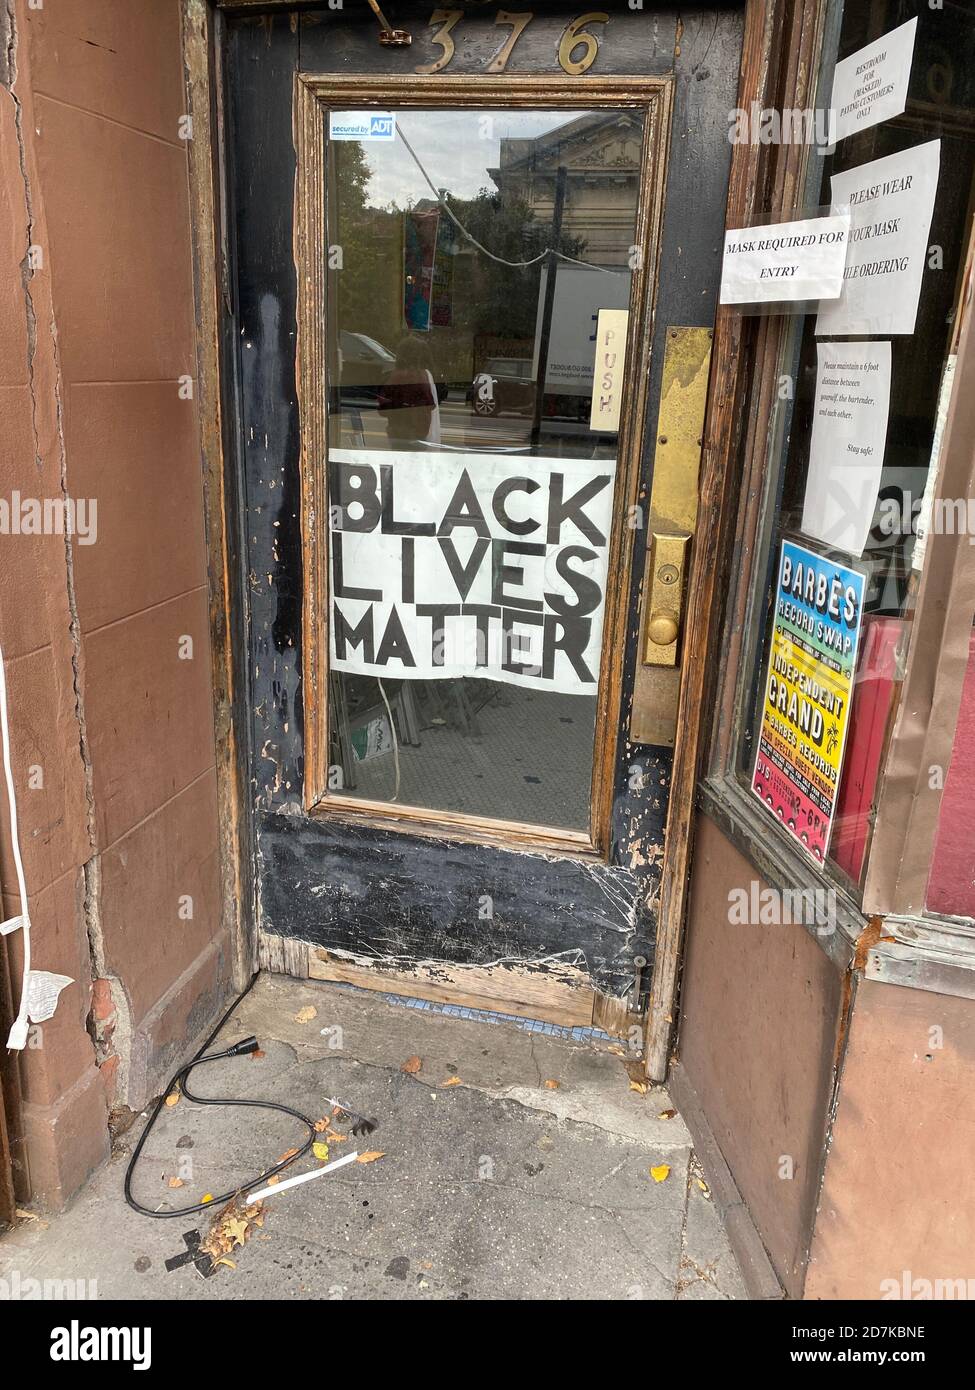 Showing support for Black Lives Matter movement on a door along 9th Street in Brooklyn, New York. Stock Photo